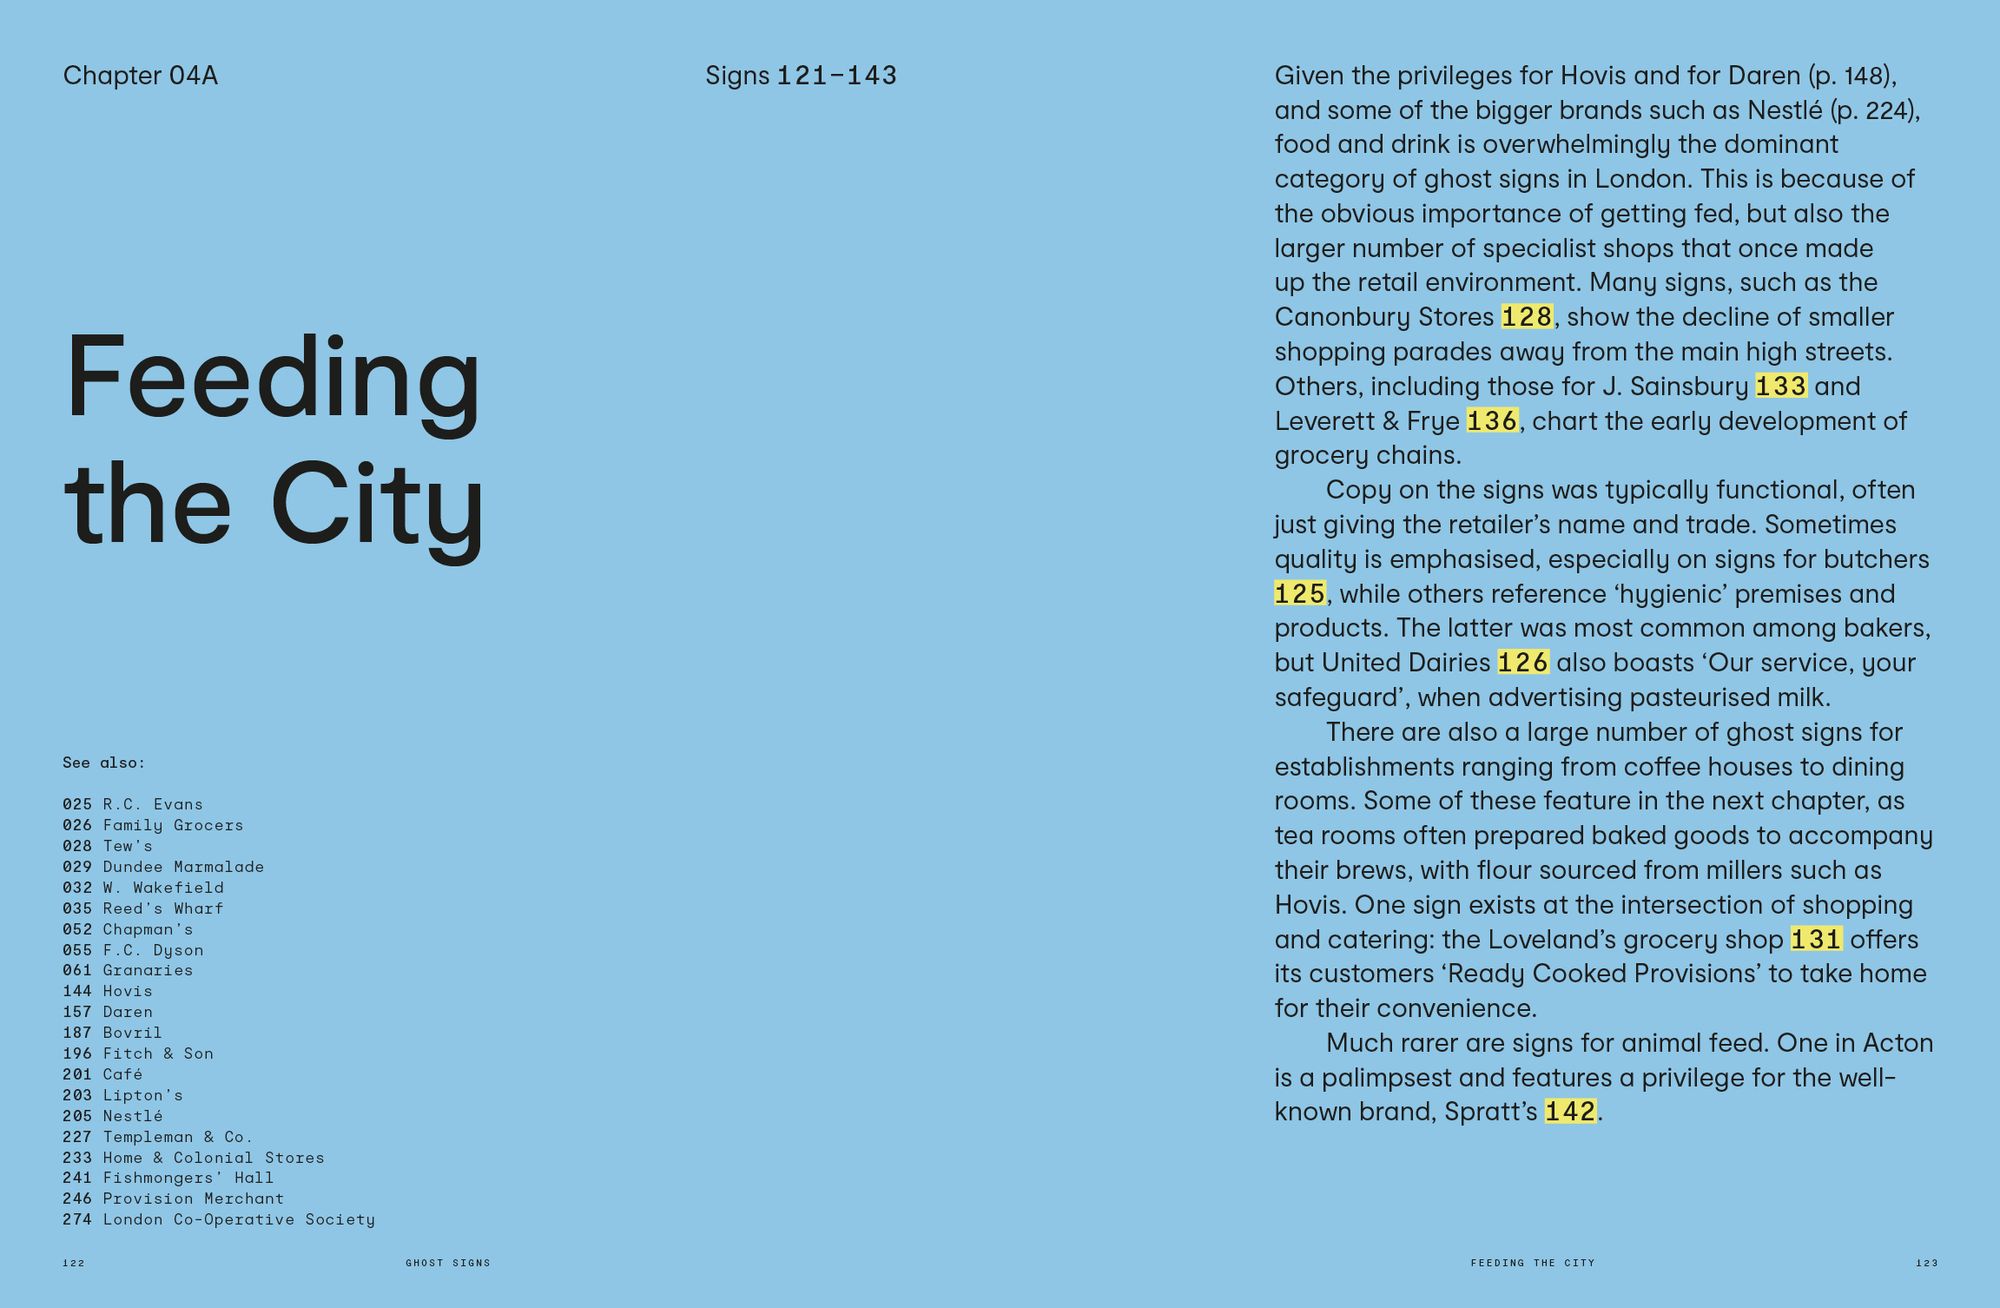 Opening spread for a chapter in the book with the title 'Feeding the City' and an introductory text.